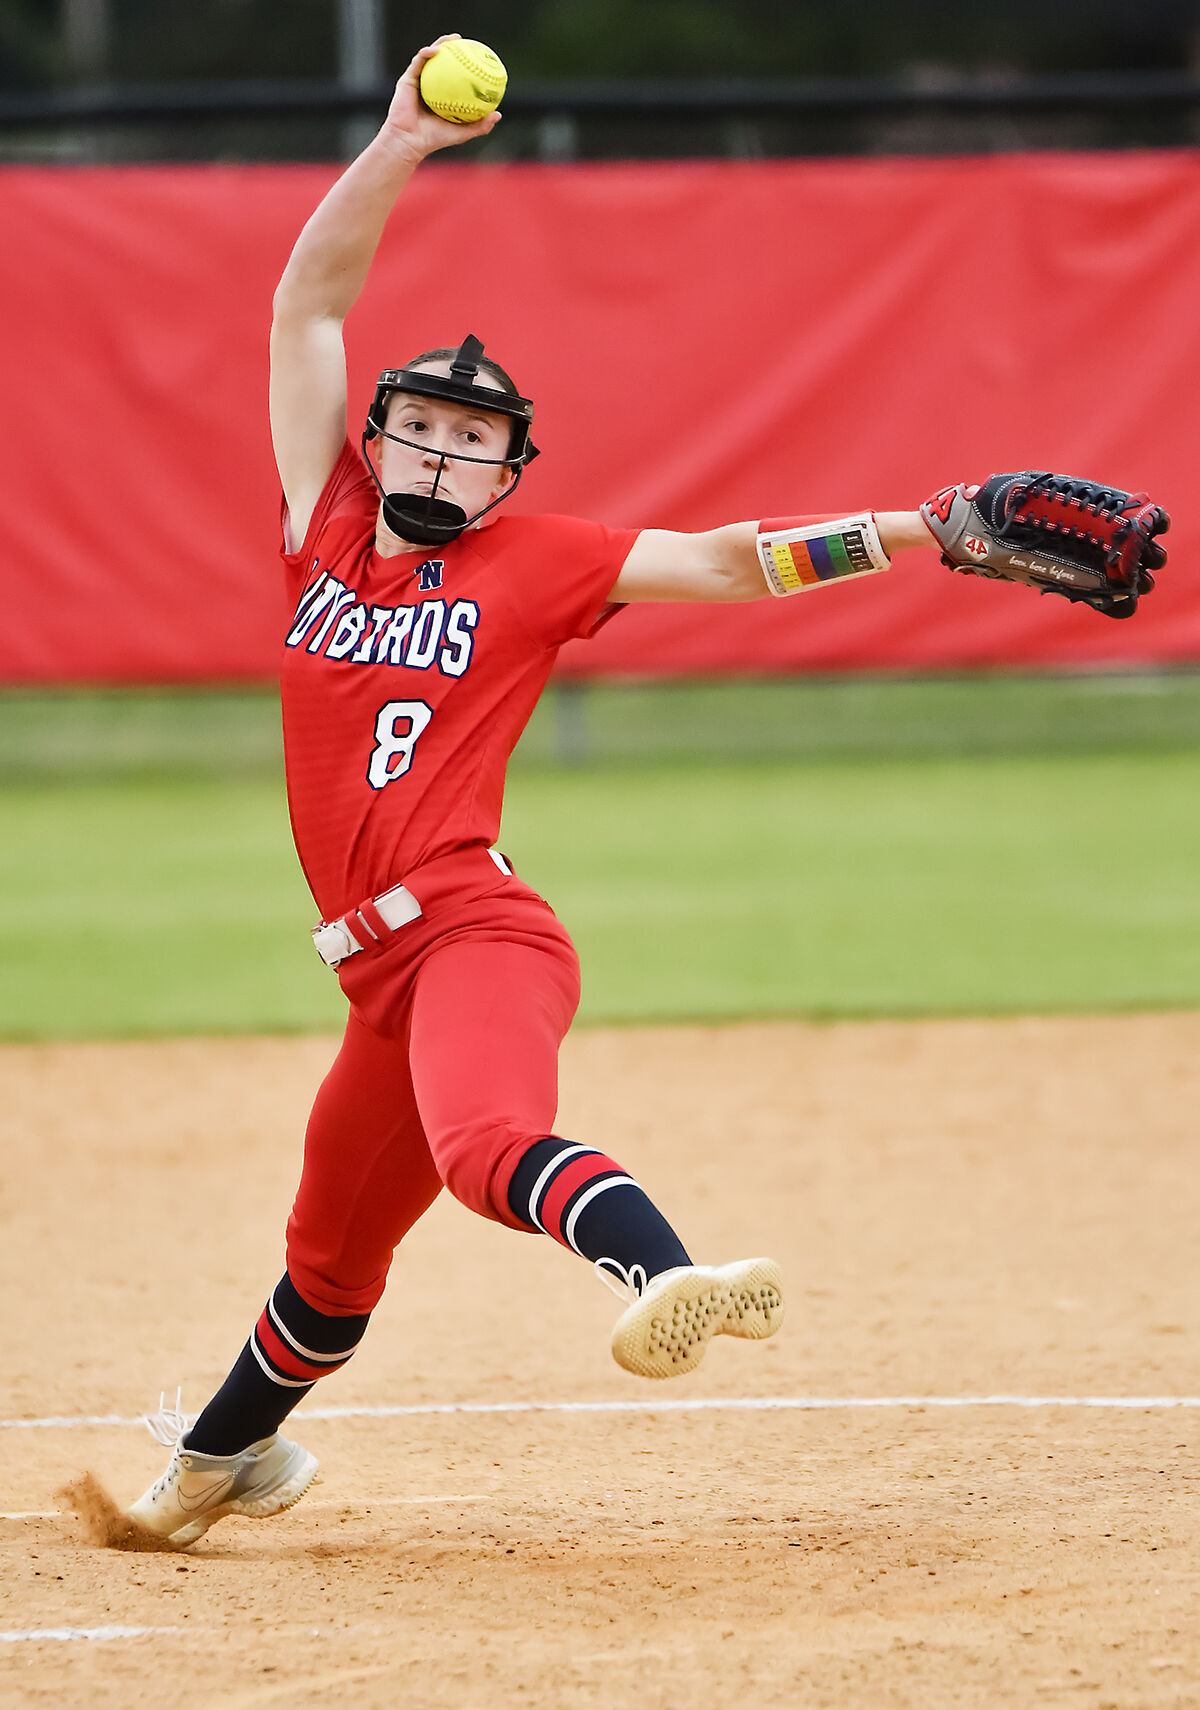 NCHSAA PLAYOFFS: Ladybirds (22-0) remain alive in 3A softball